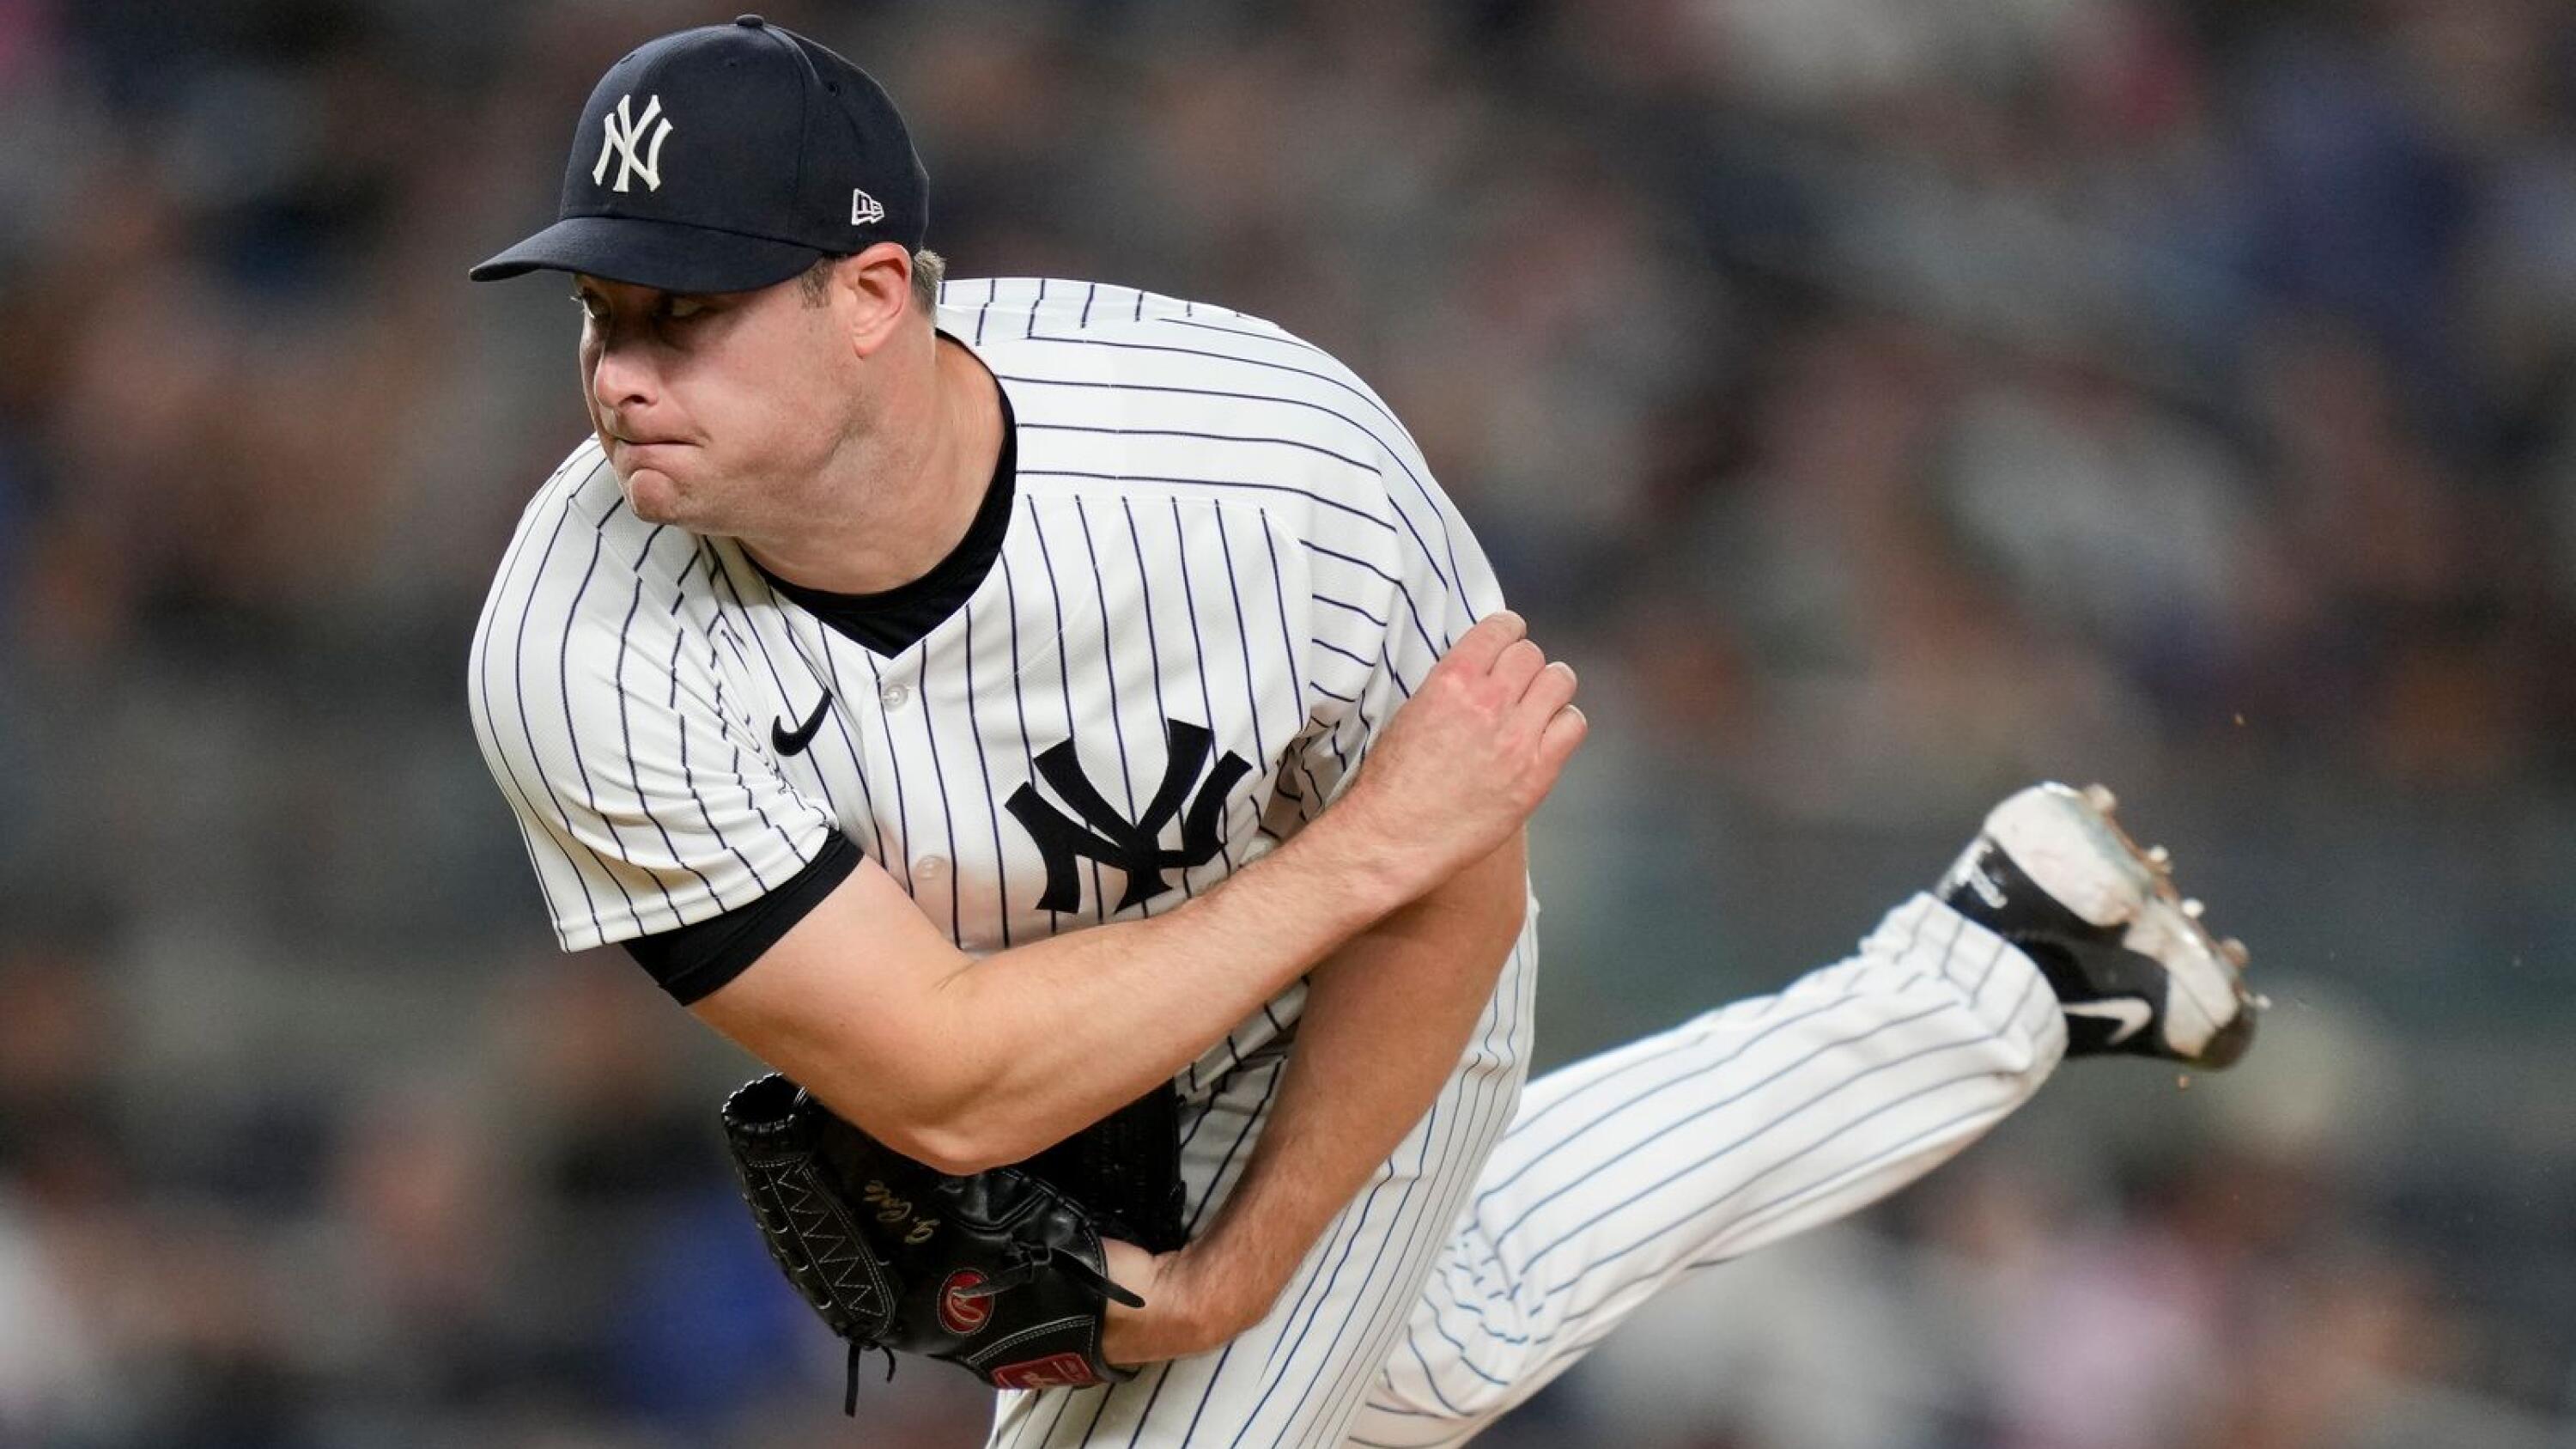 Gerrit Cole dominant as Yankees beat Mariners to end 4-game skid